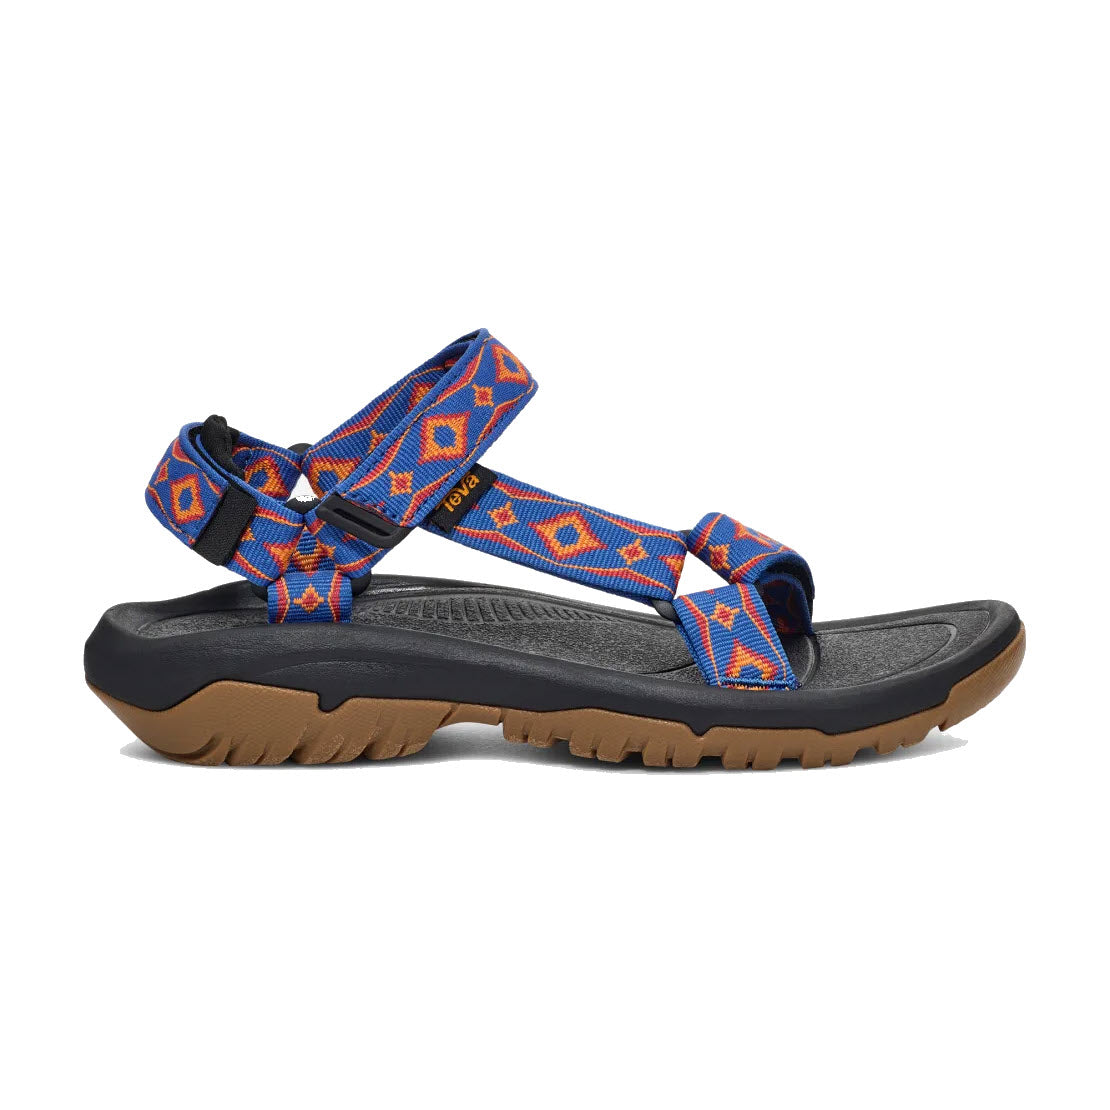 A single blue and orange Teva TEVA HURRICANE XLT2 90S ARCHIVAL REVIVAL - WOMENS sport sandal, featuring heritage strap designs, against a white background.